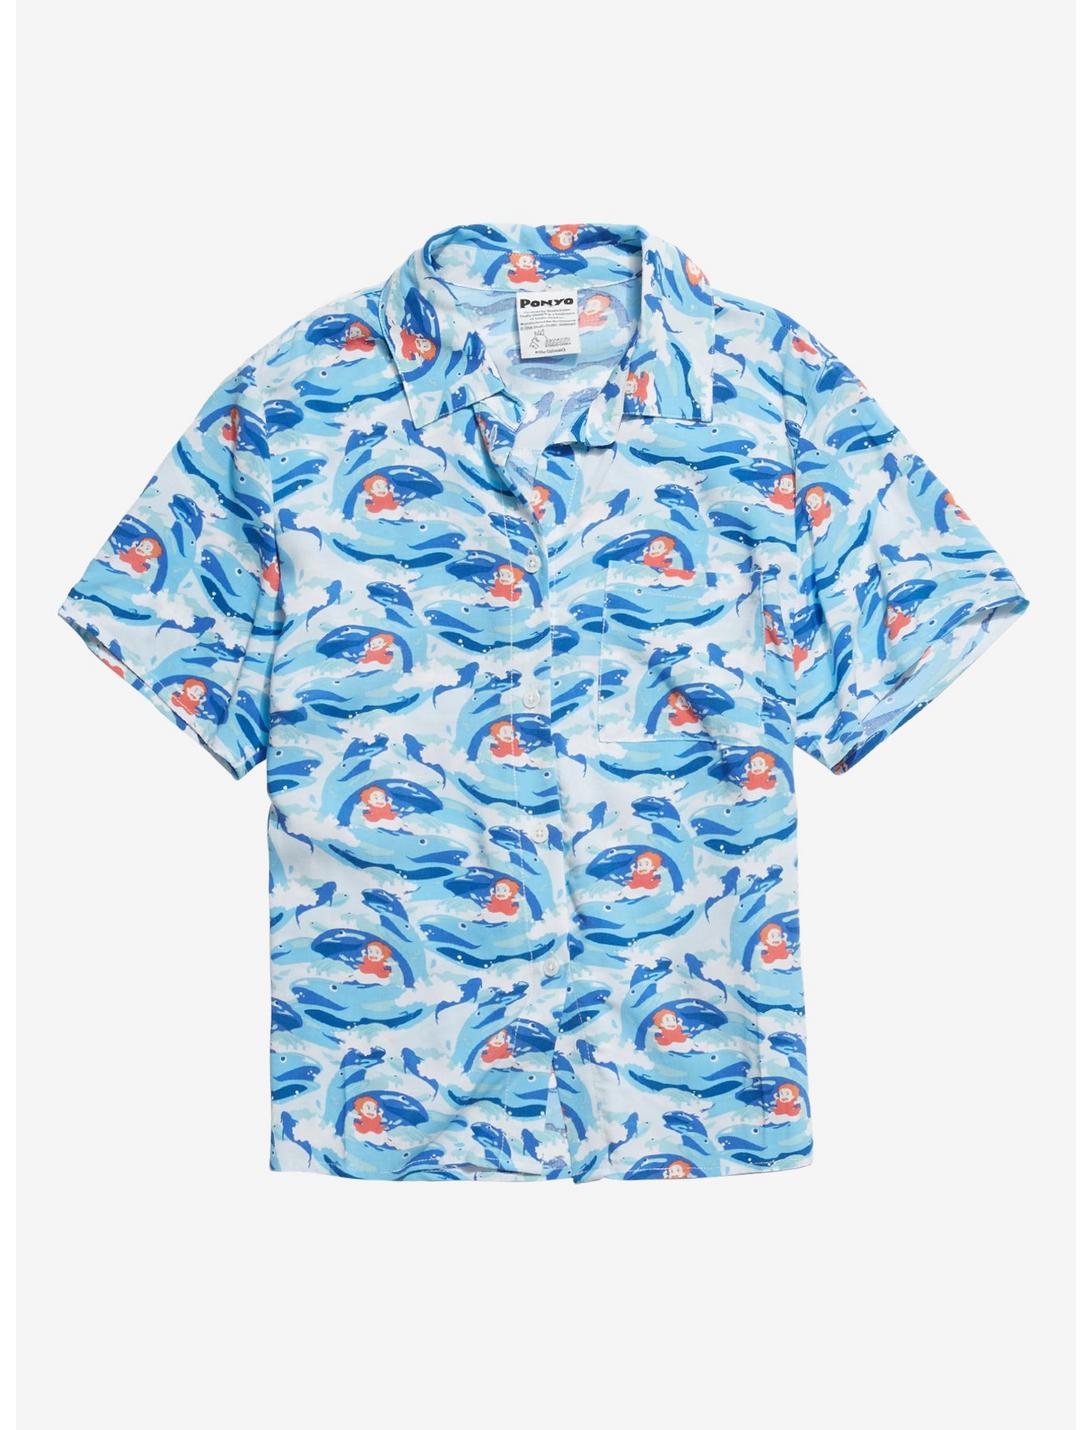 Her Universe Studio Ghibli Capsule Collection Ponyo Wave Print Woven Button-Up Plus Size, MULTI, hi-res